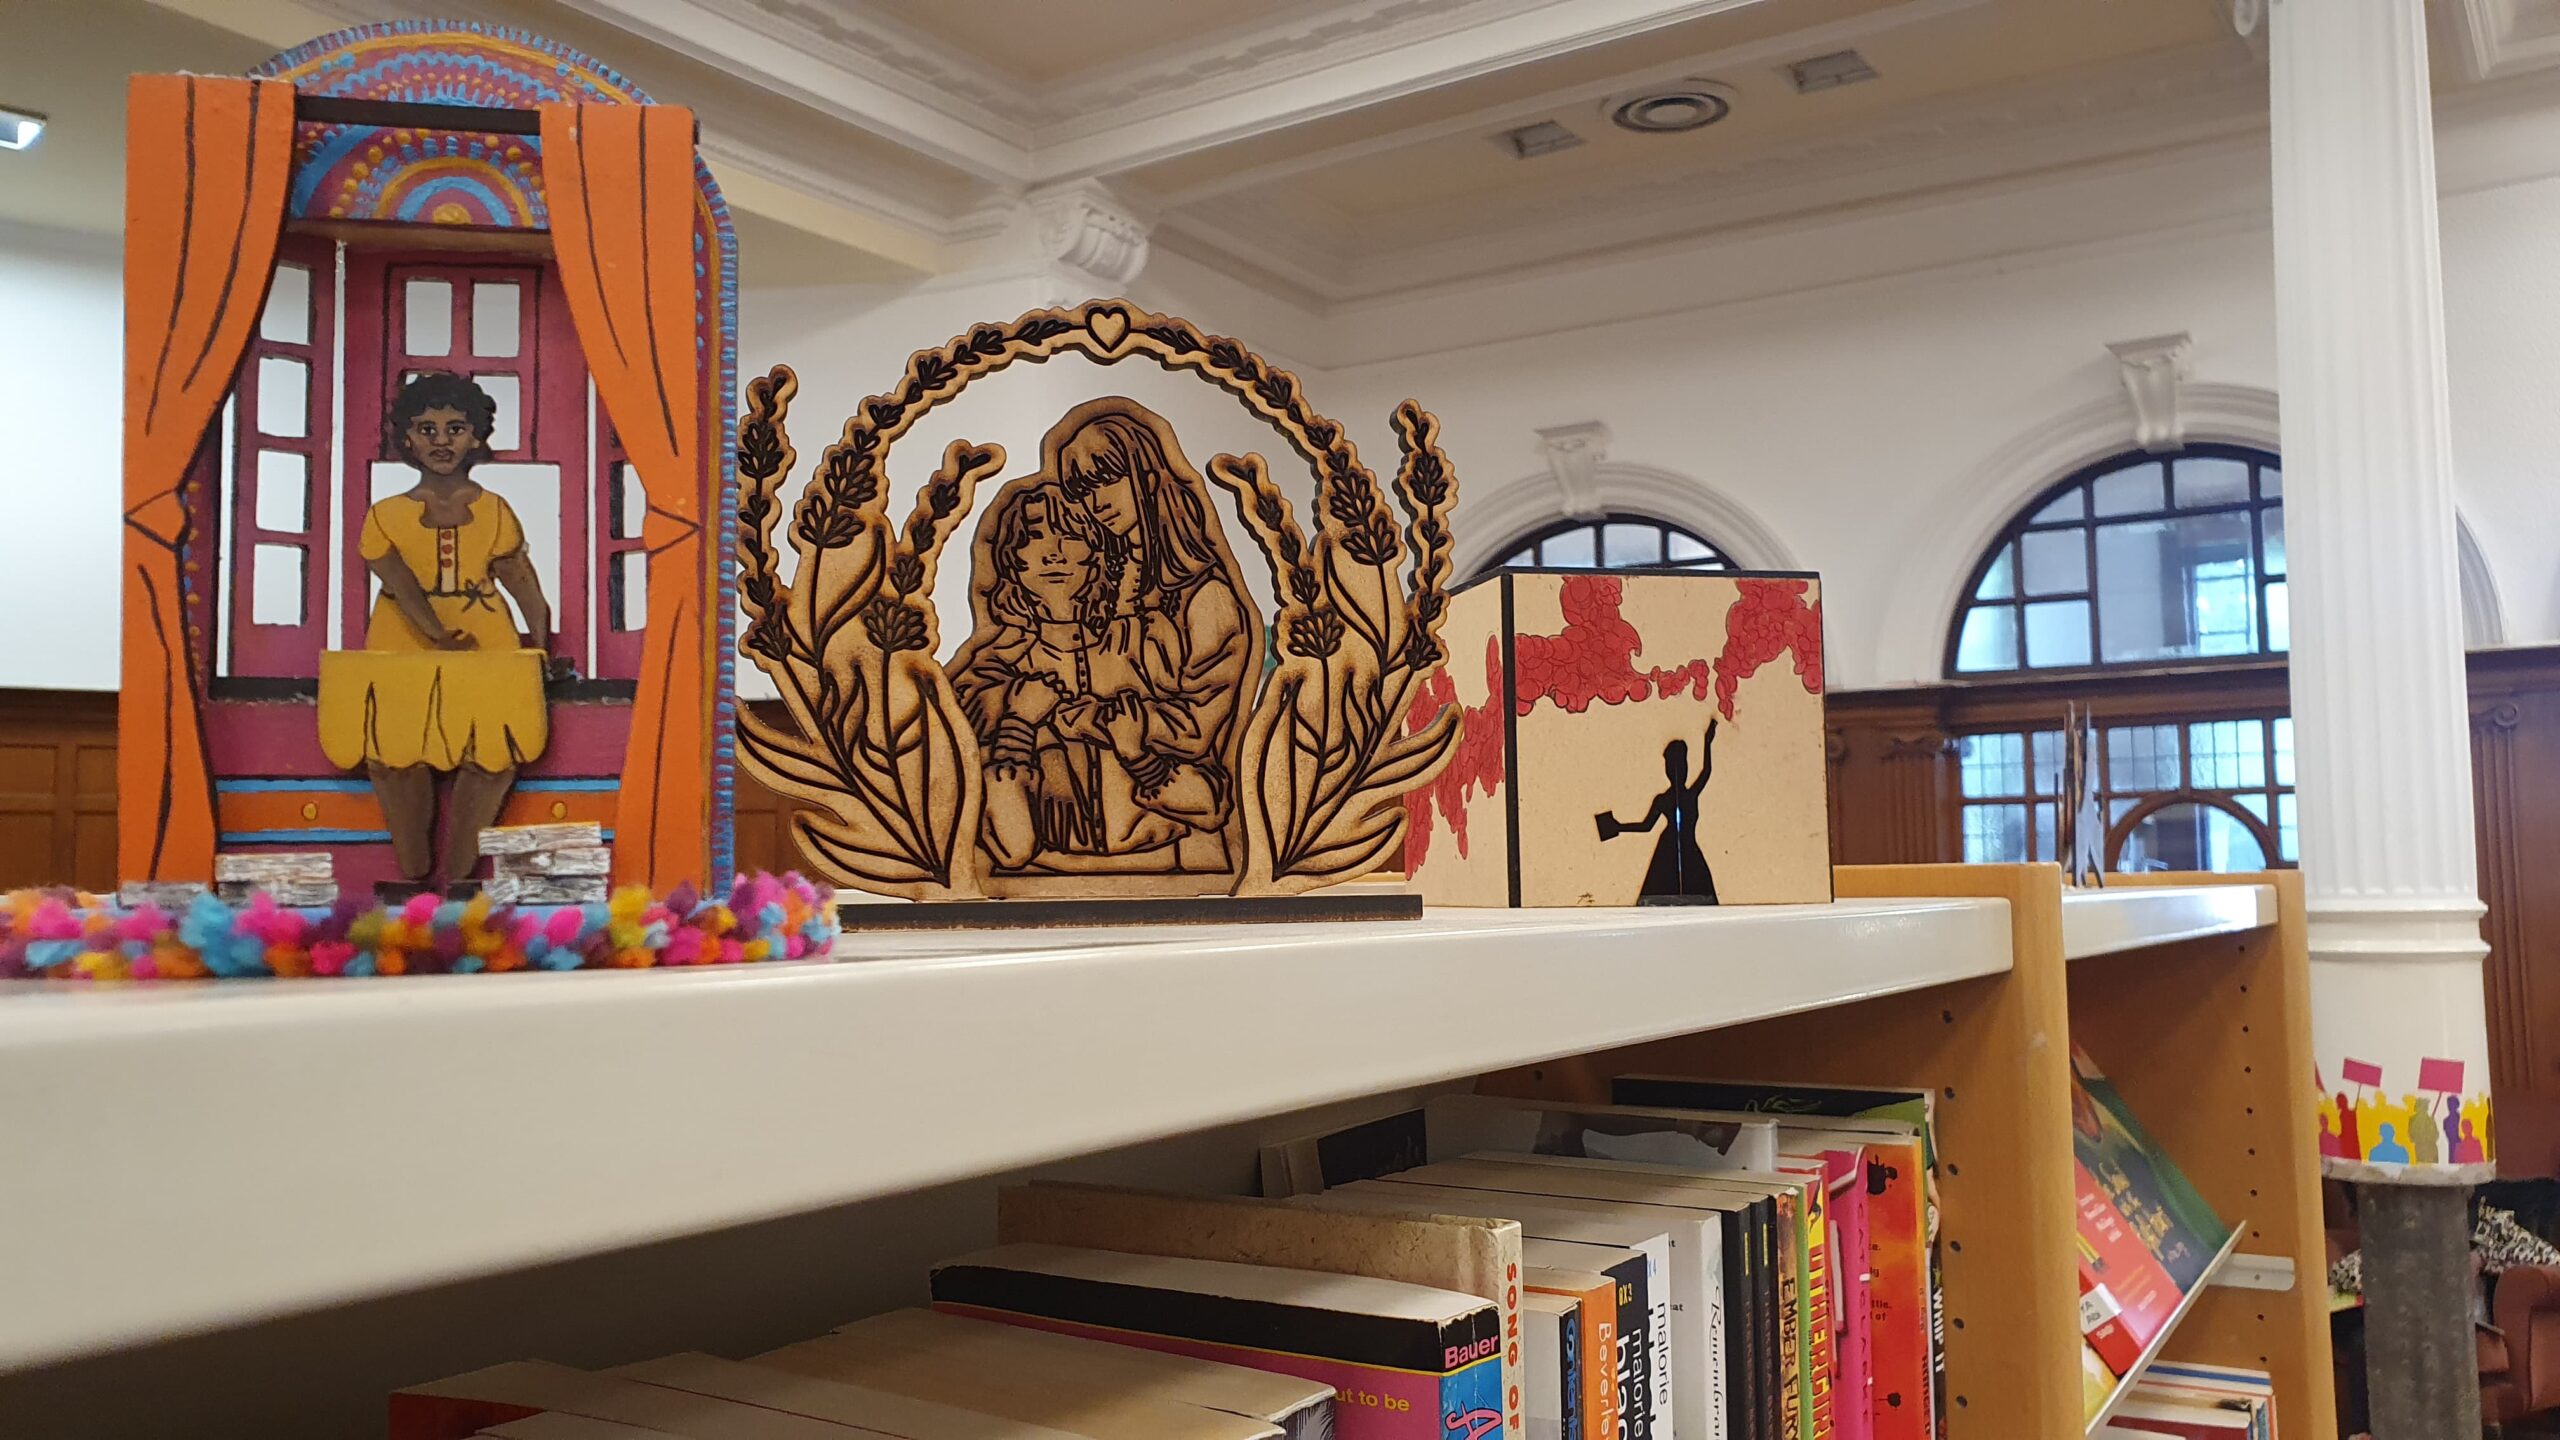 Elaborate 3D cutout illustrations on shelvs in the GWL main library space